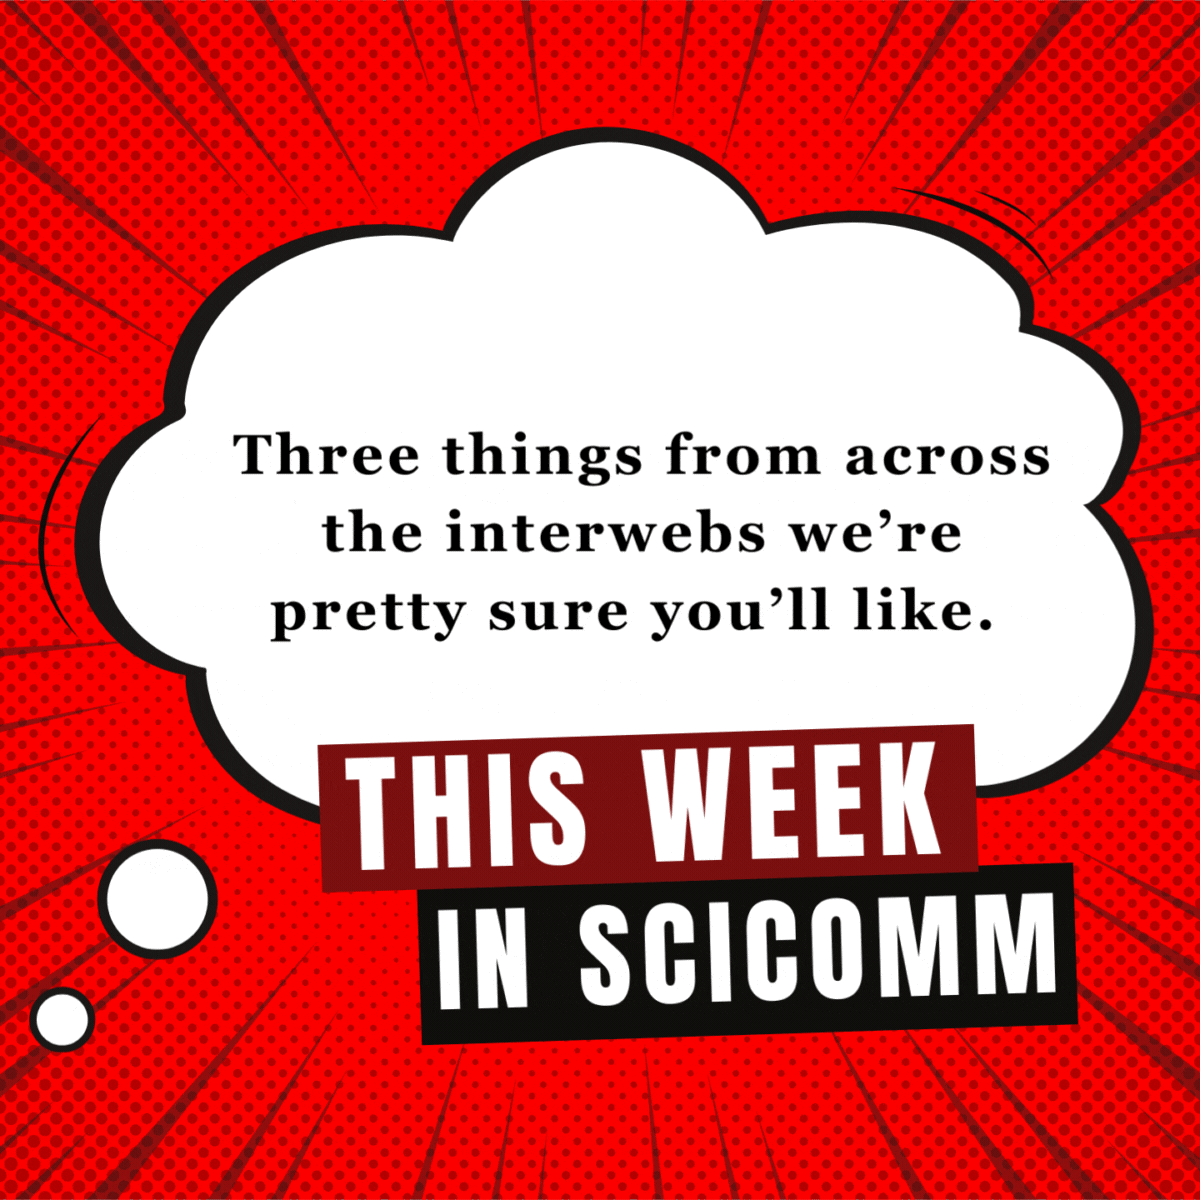  this week in scicomm: three things from across the interwebs we're pretty sure you'll like.